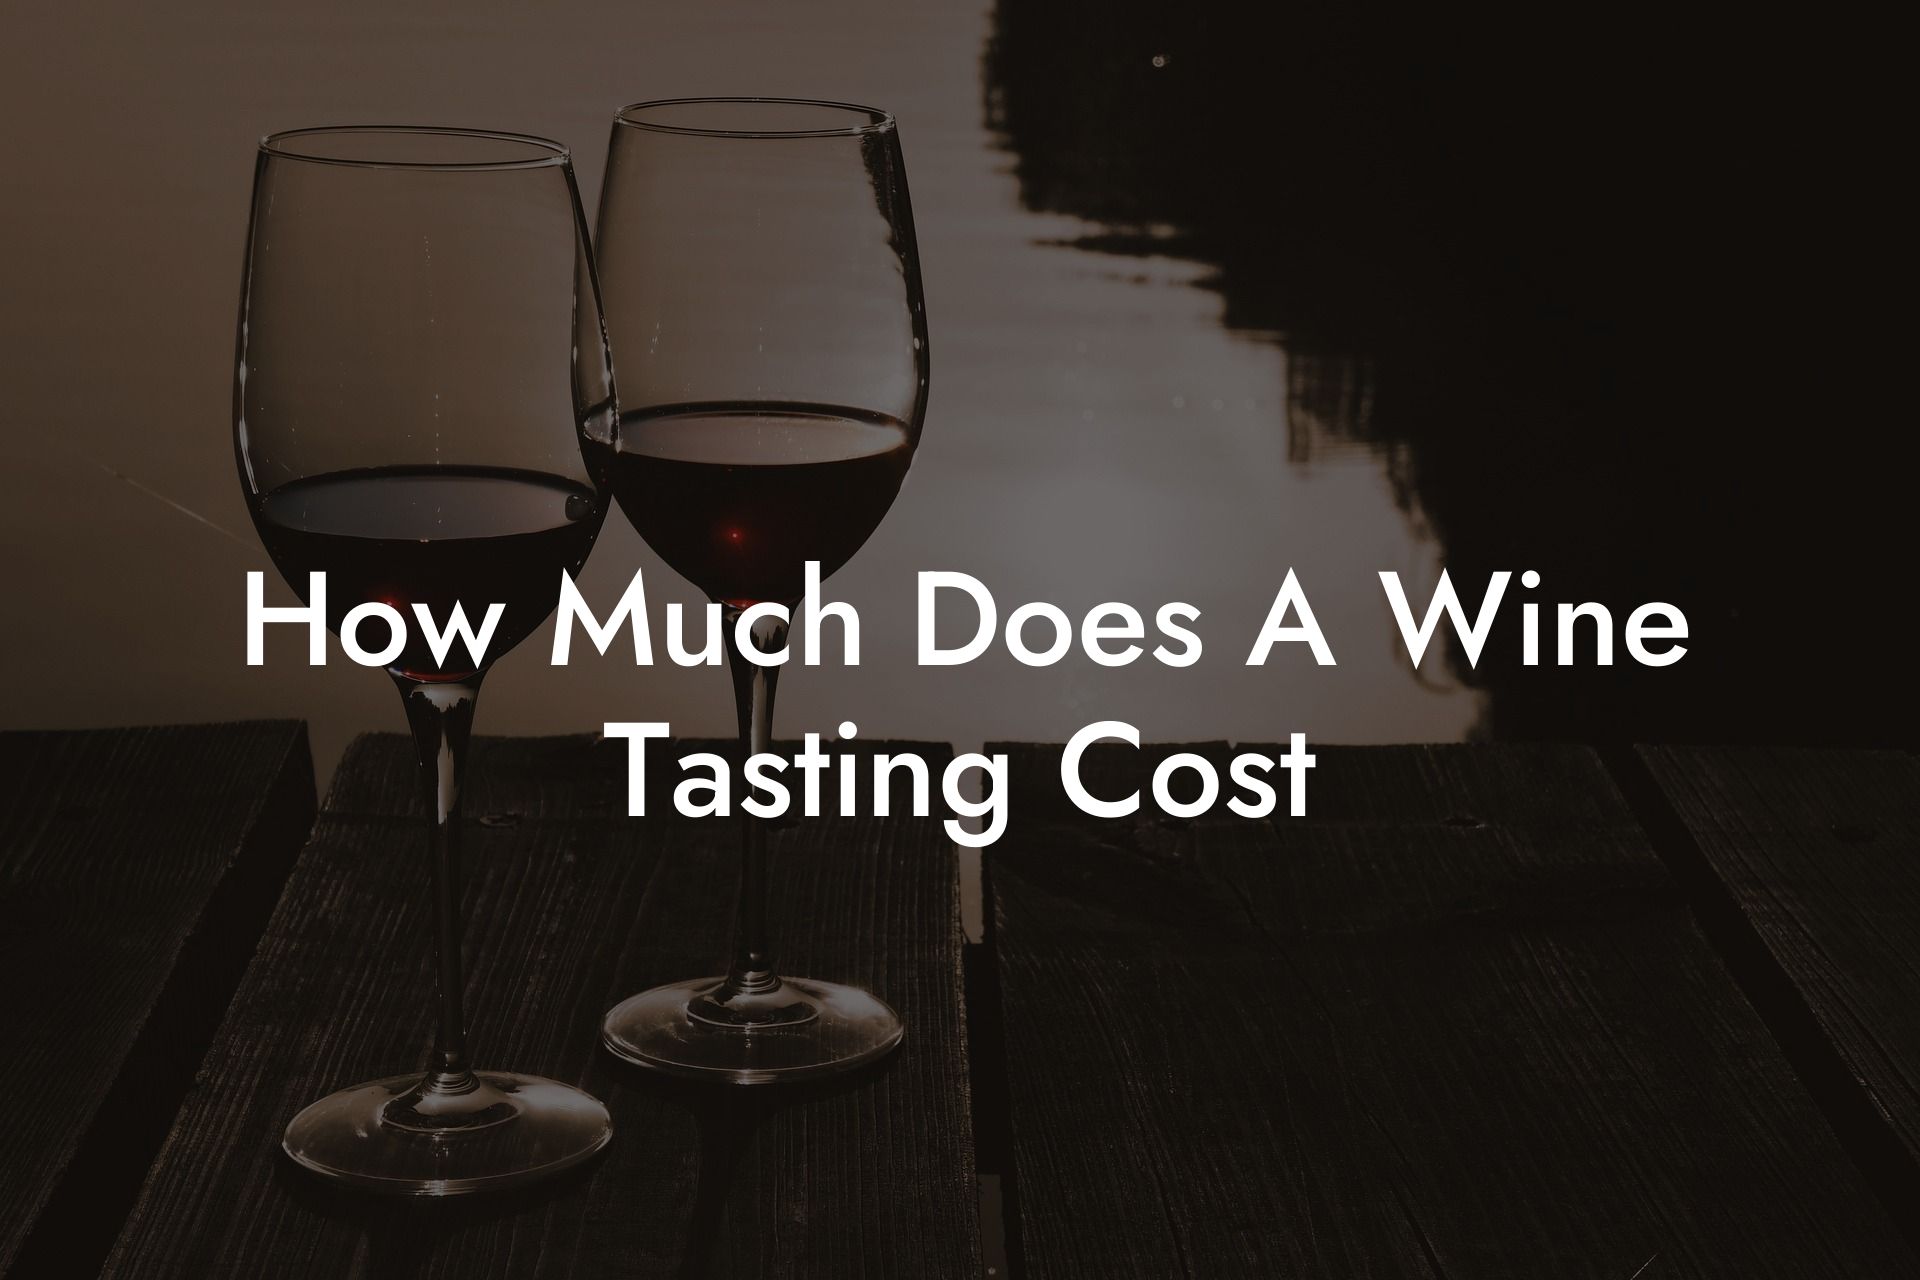 How Much Does A Wine Tasting Cost